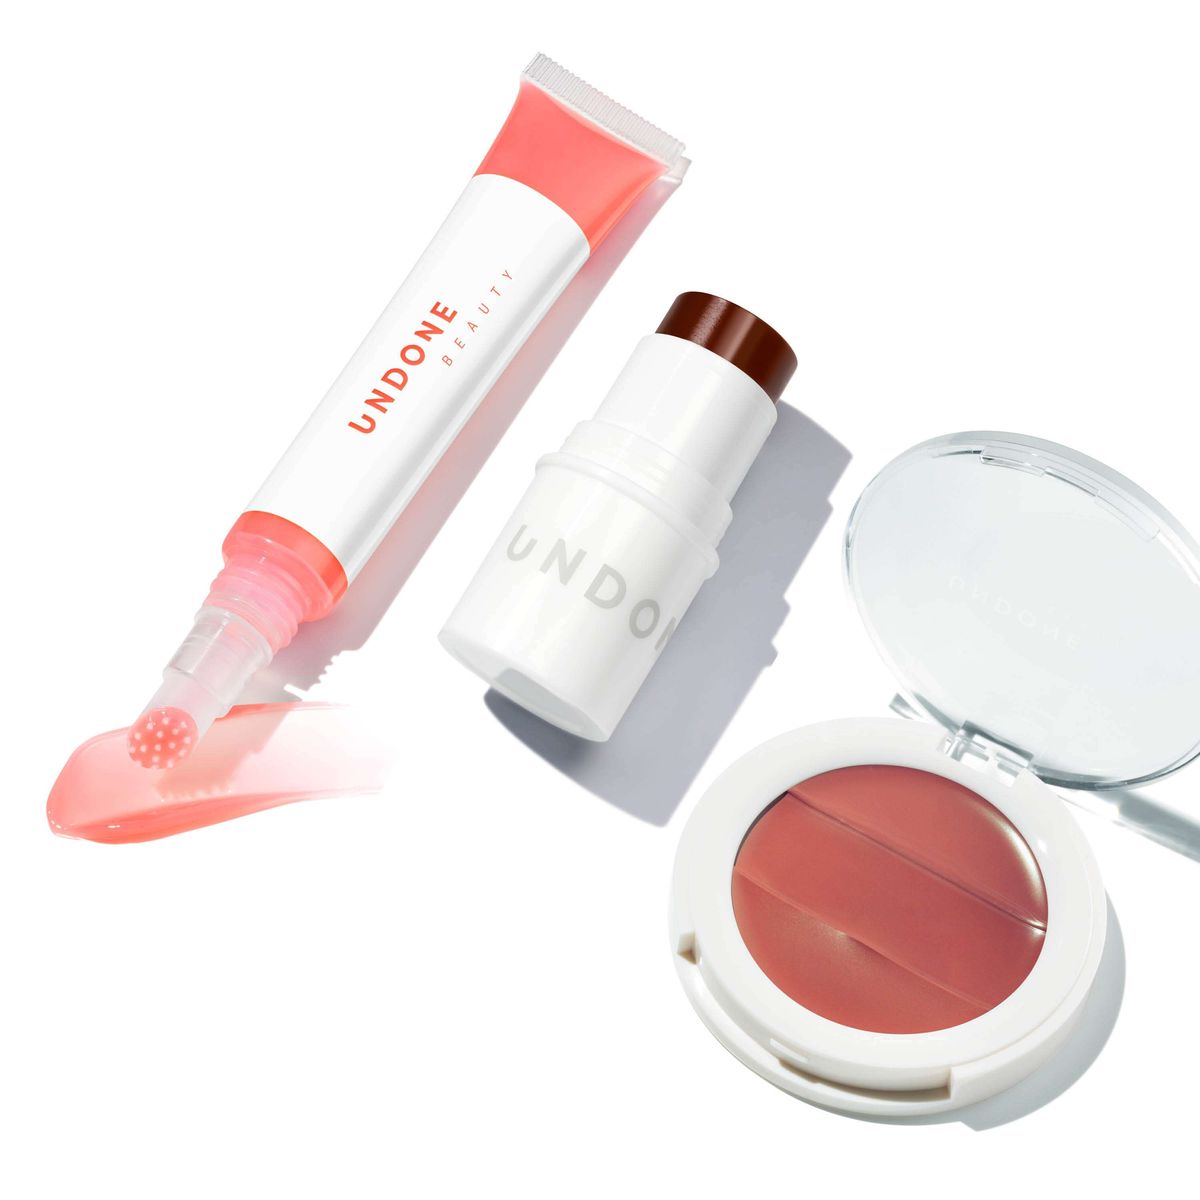 Undone Beauty Work From Home Bundle